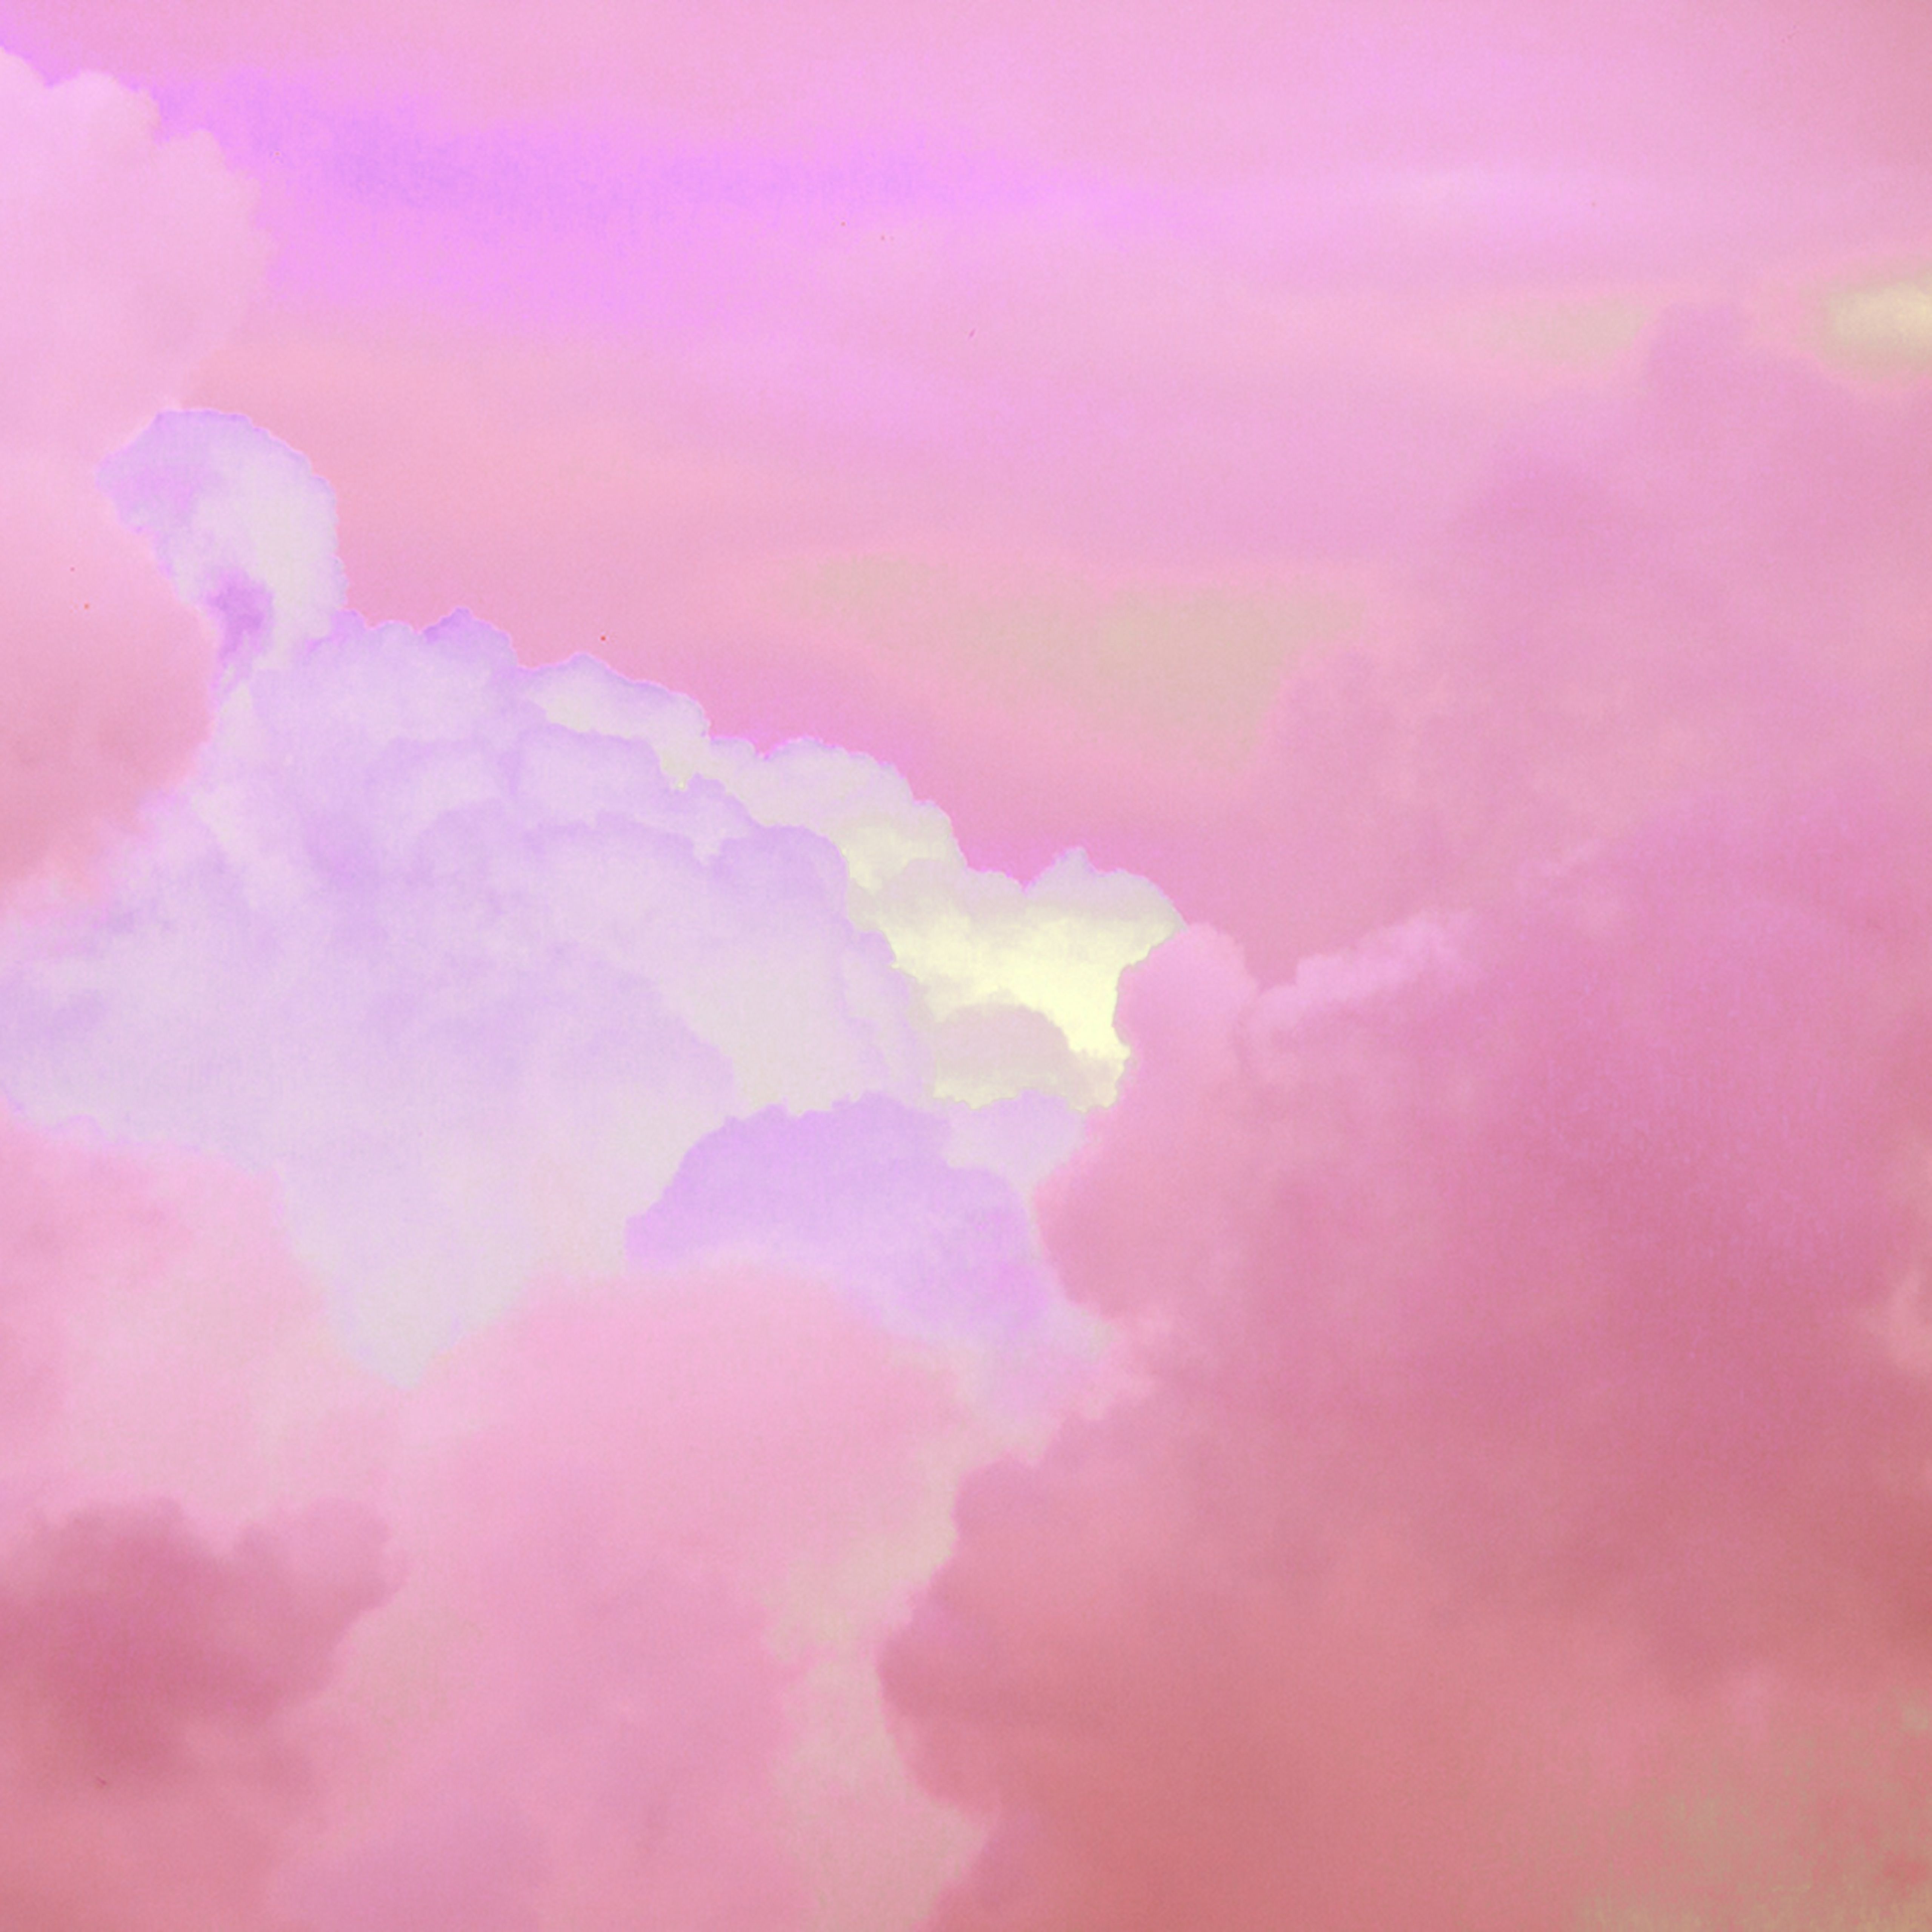 A pink and purple sky with clouds - Cloud